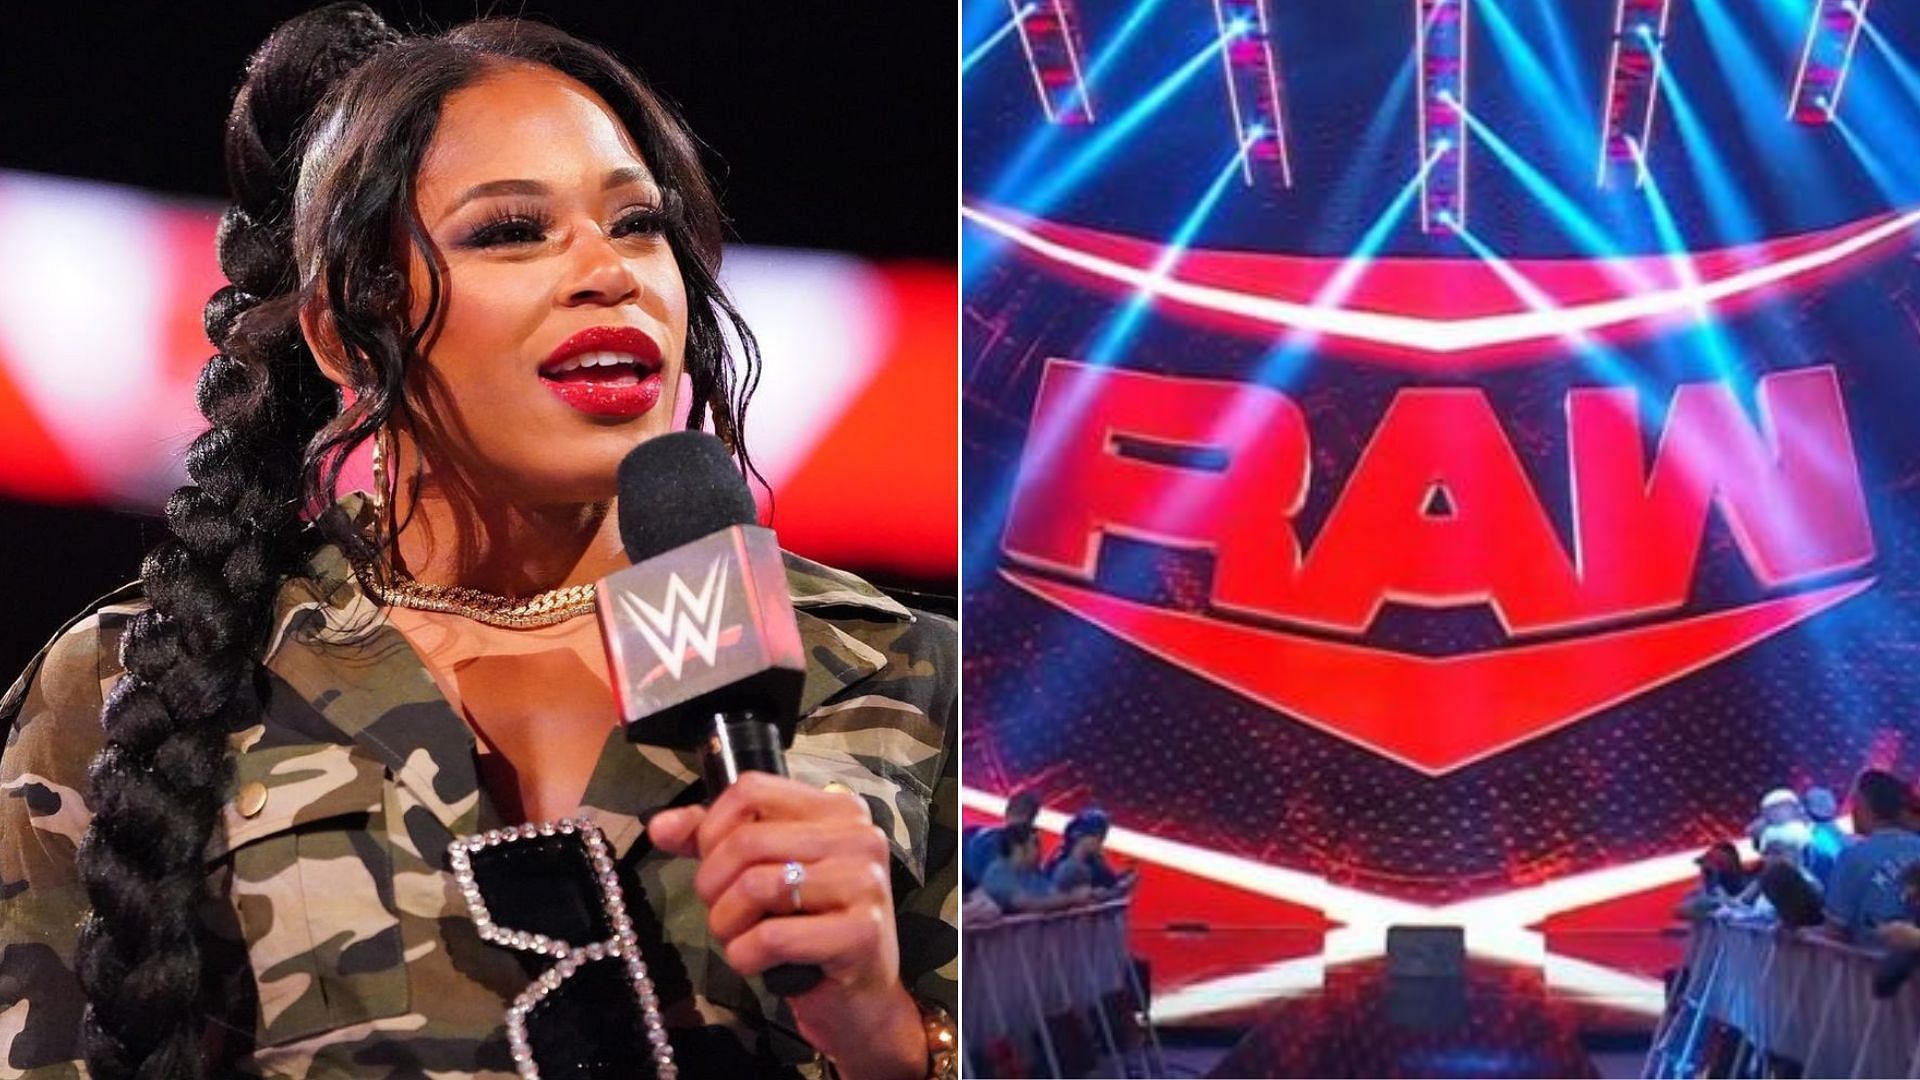 Bianca Belair is the current RAW Women